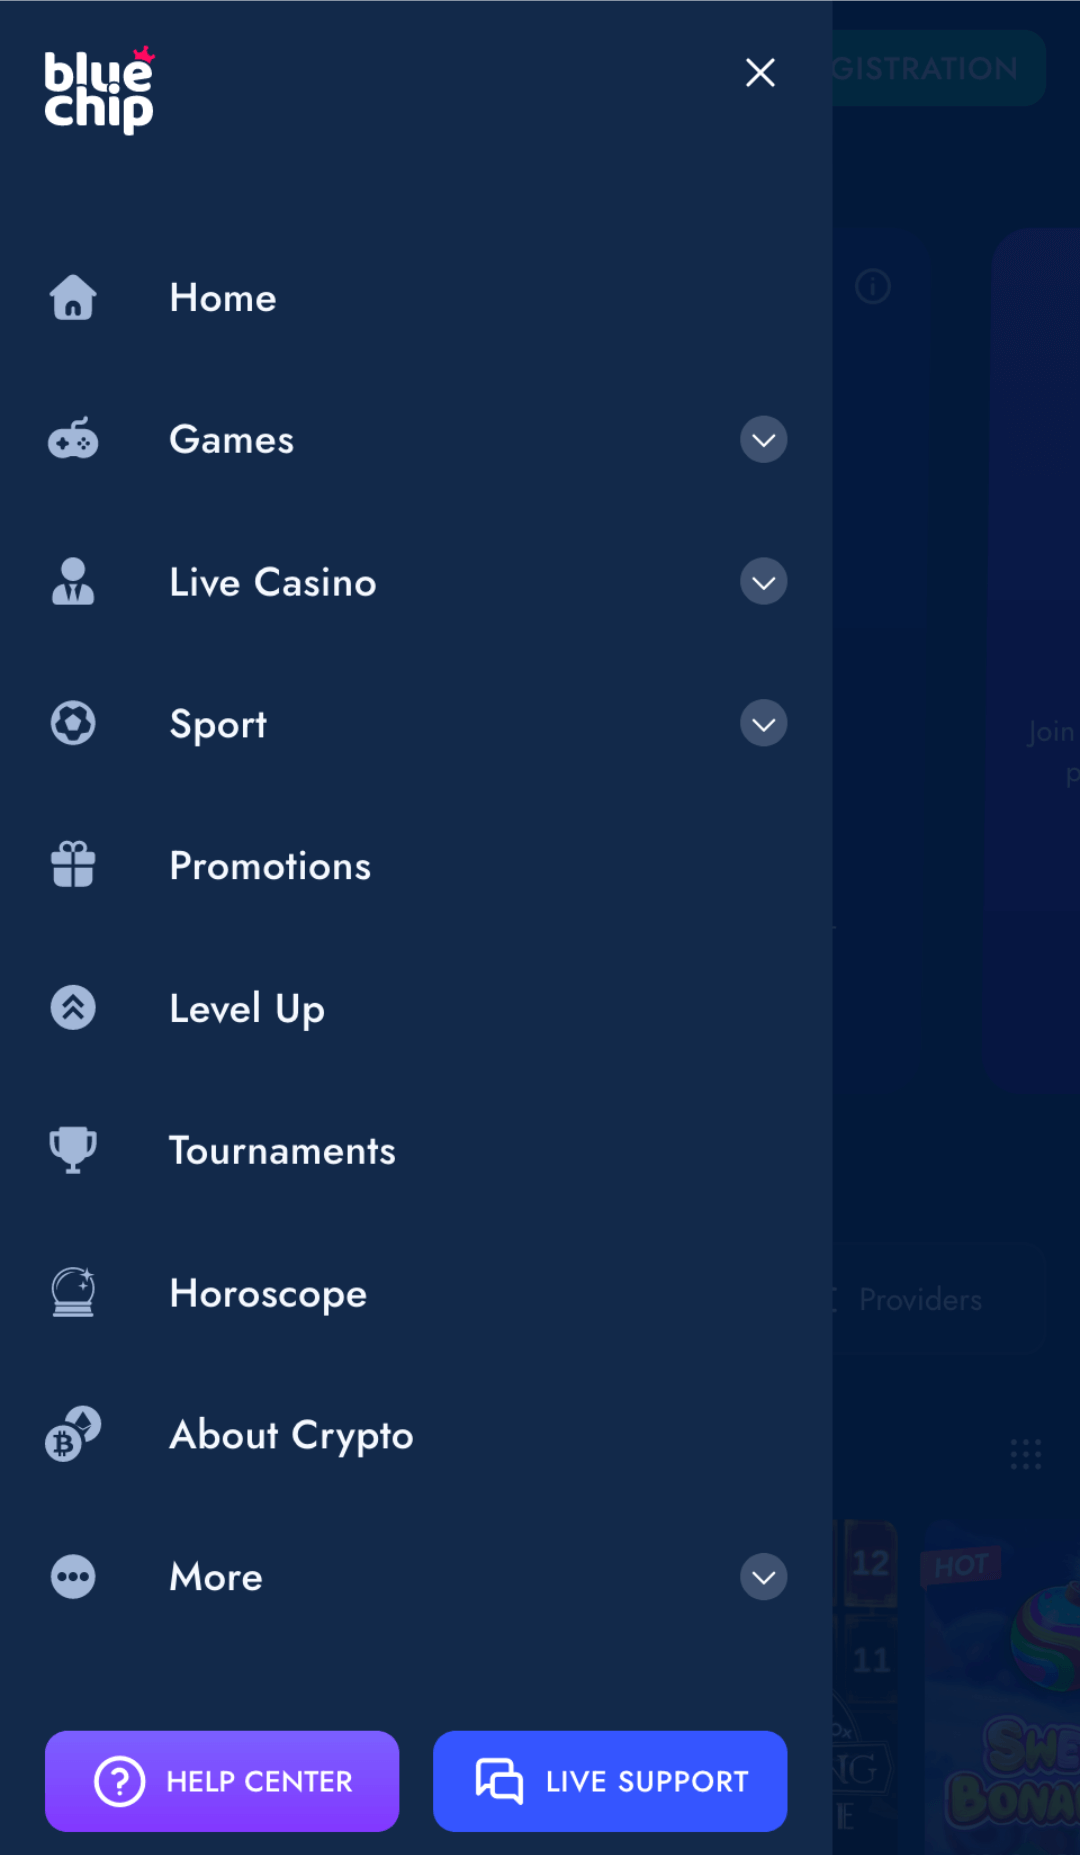 The main menu in the Bluechip app provides quick access to the main sections